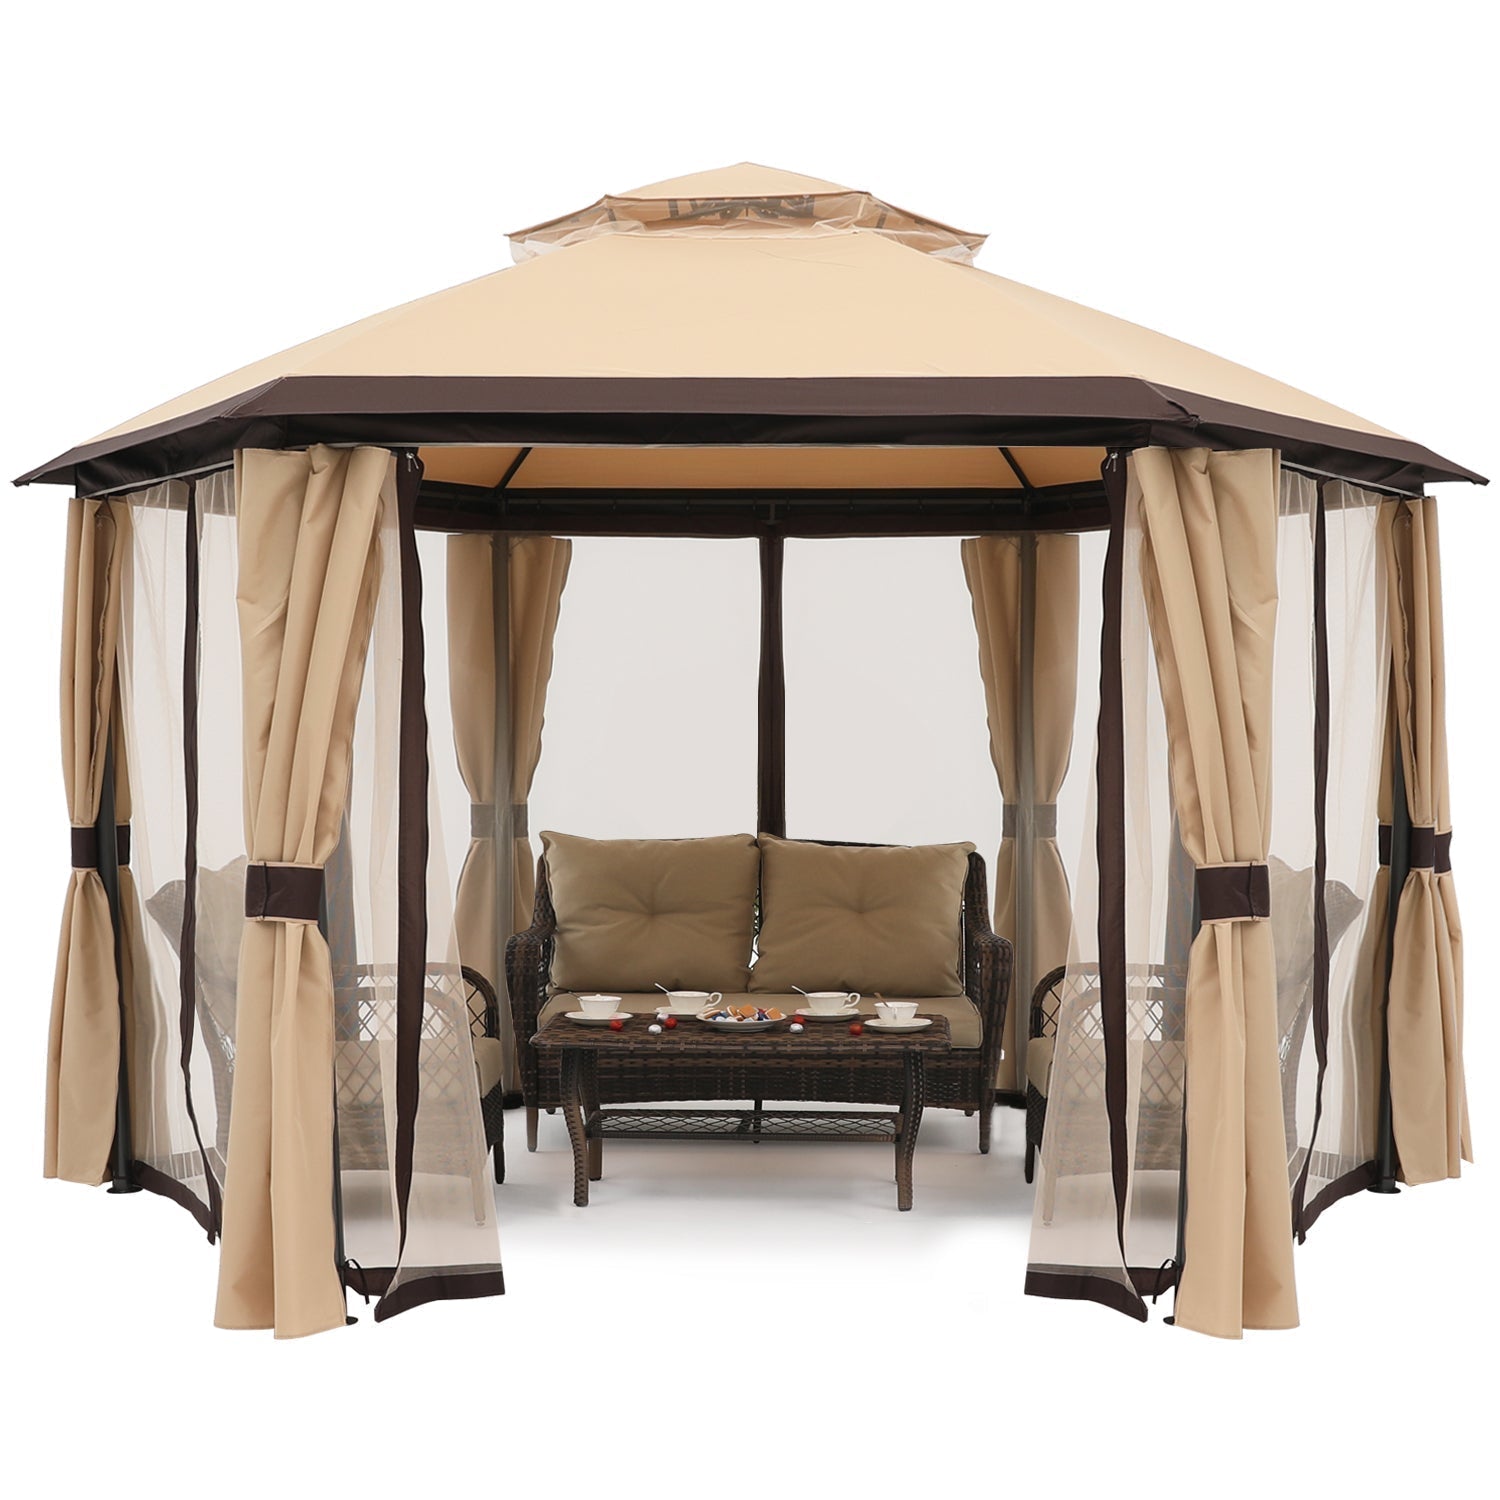 10'x10' Gazebos for Patios, Outdoor Hexagonal Gazebo with Netting and Privacy Curtains for Garden, Patio, Backyard - ABC-CANOPY